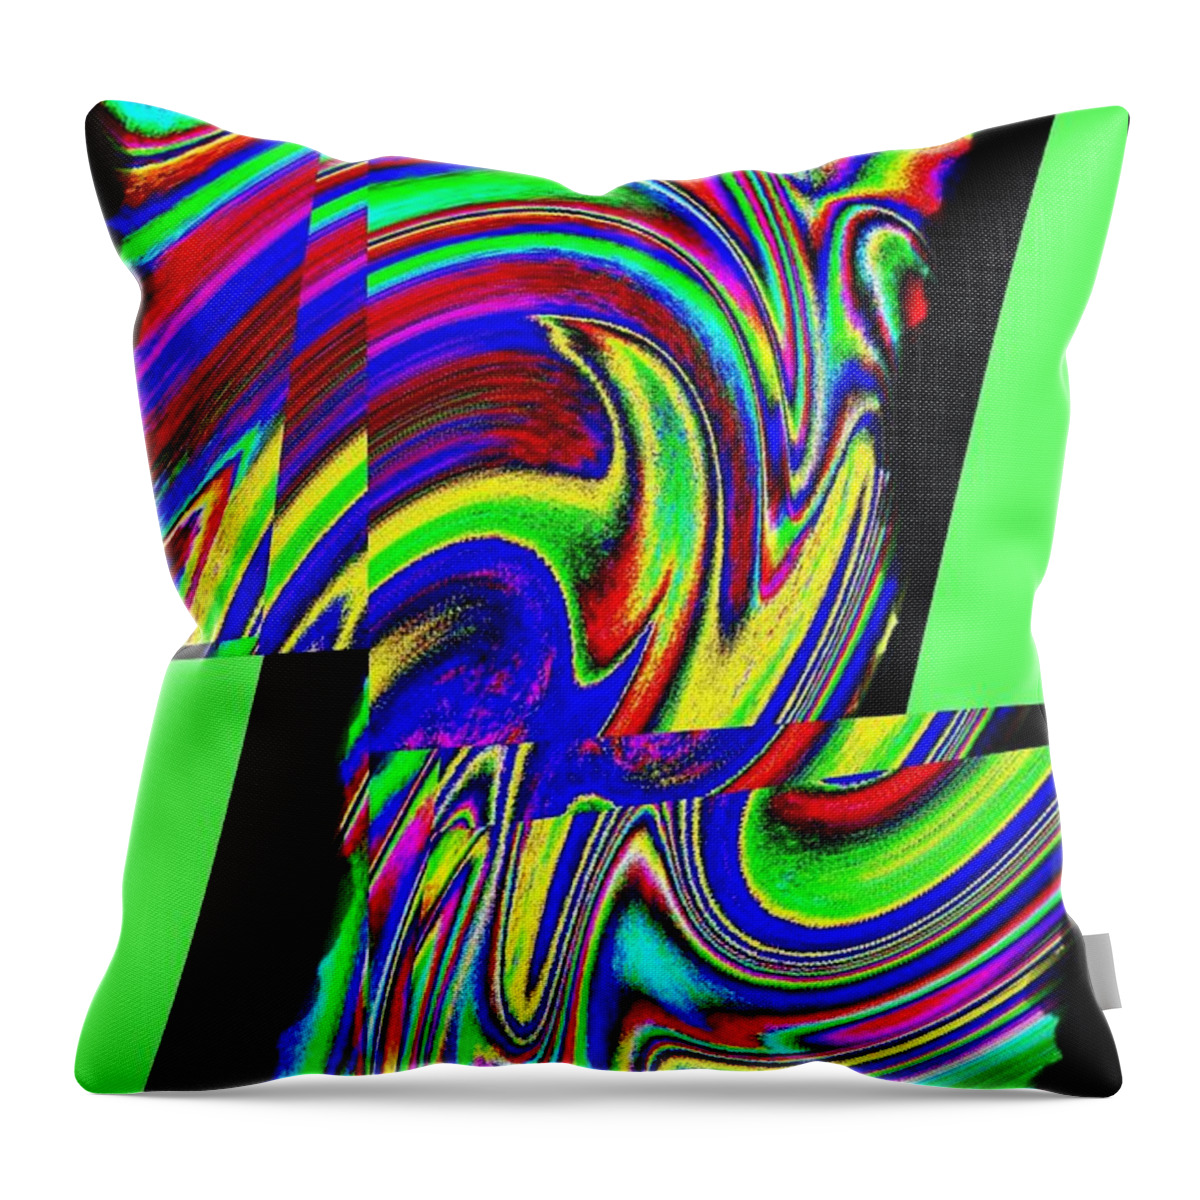 Muse Throw Pillow featuring the digital art Muse 46 by Will Borden